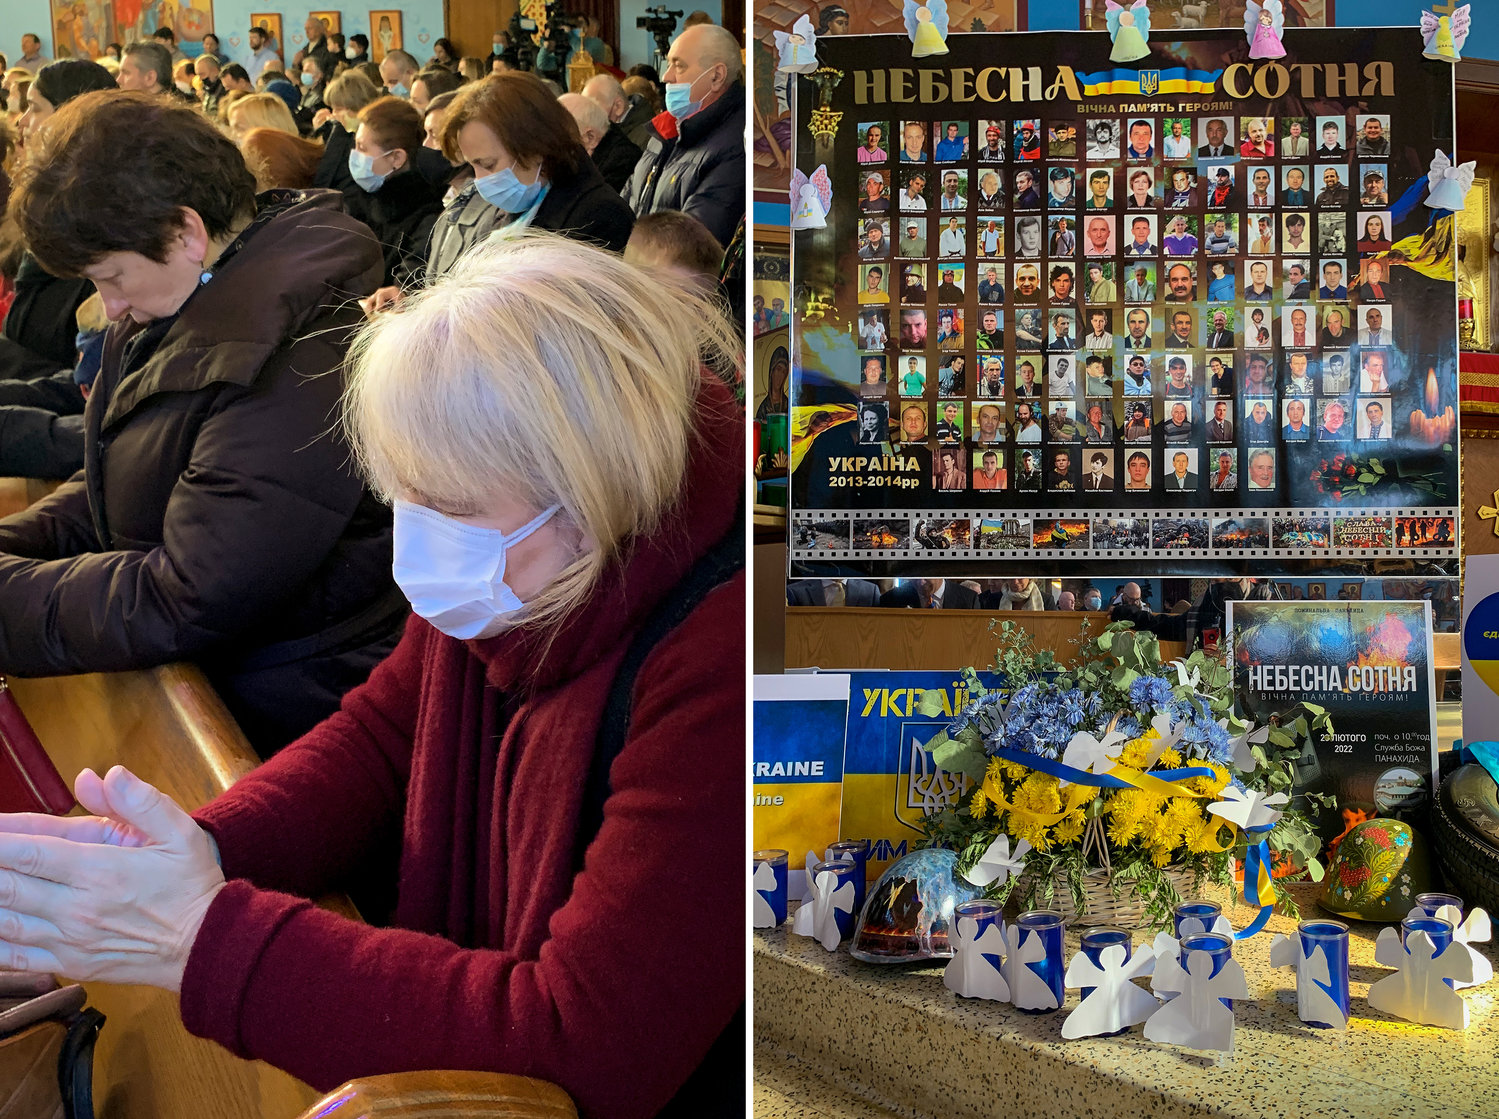 By the time Sunday morning Mass started at St. Michael’s Ukrainian Catholic Church in Yonkers, there was nowhere for any latecomers to sit. A sanctuary already filled with religious iconography added patriotic symbols like Ukrainian flags from a congregation fearing for their Eastern European home as Russia continued its unprovoked attack on neighboring Ukraine.